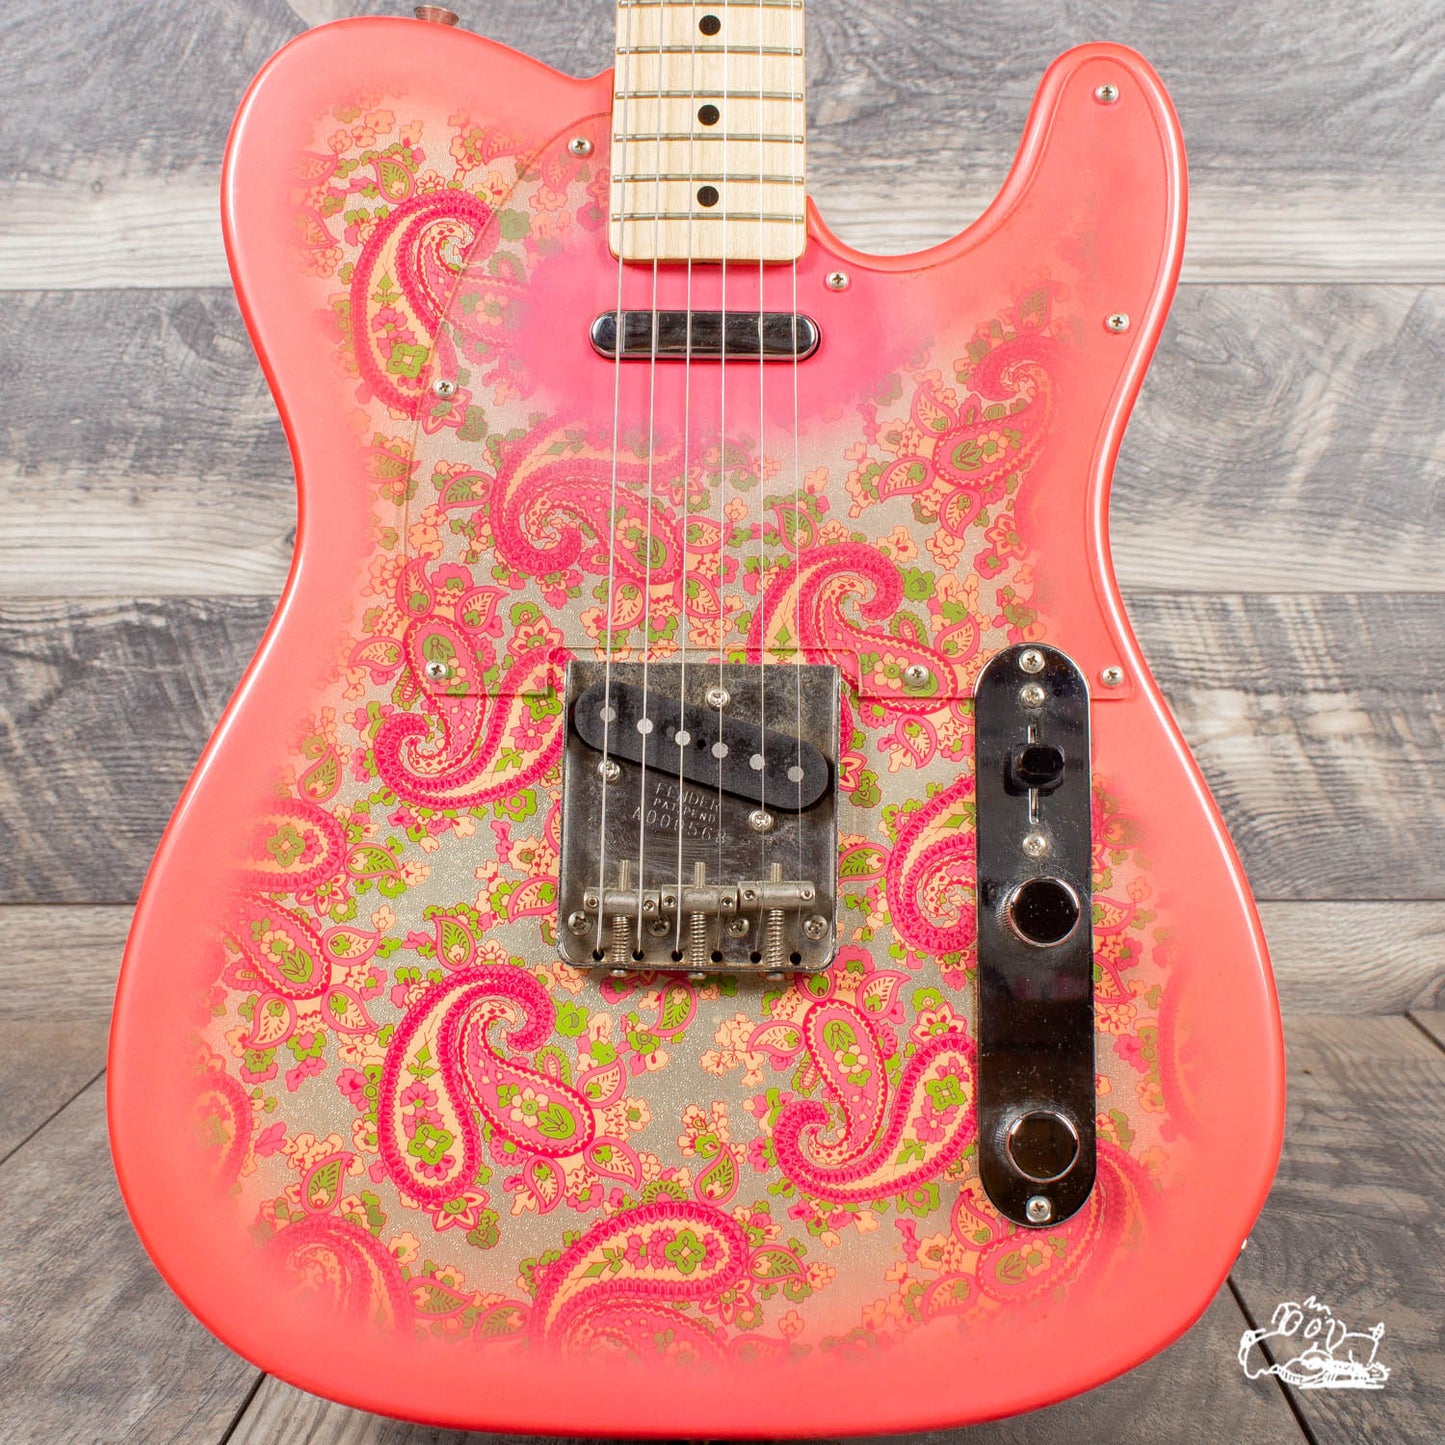 1999 Fender Telecaster - Paisley - Crafted in Japan